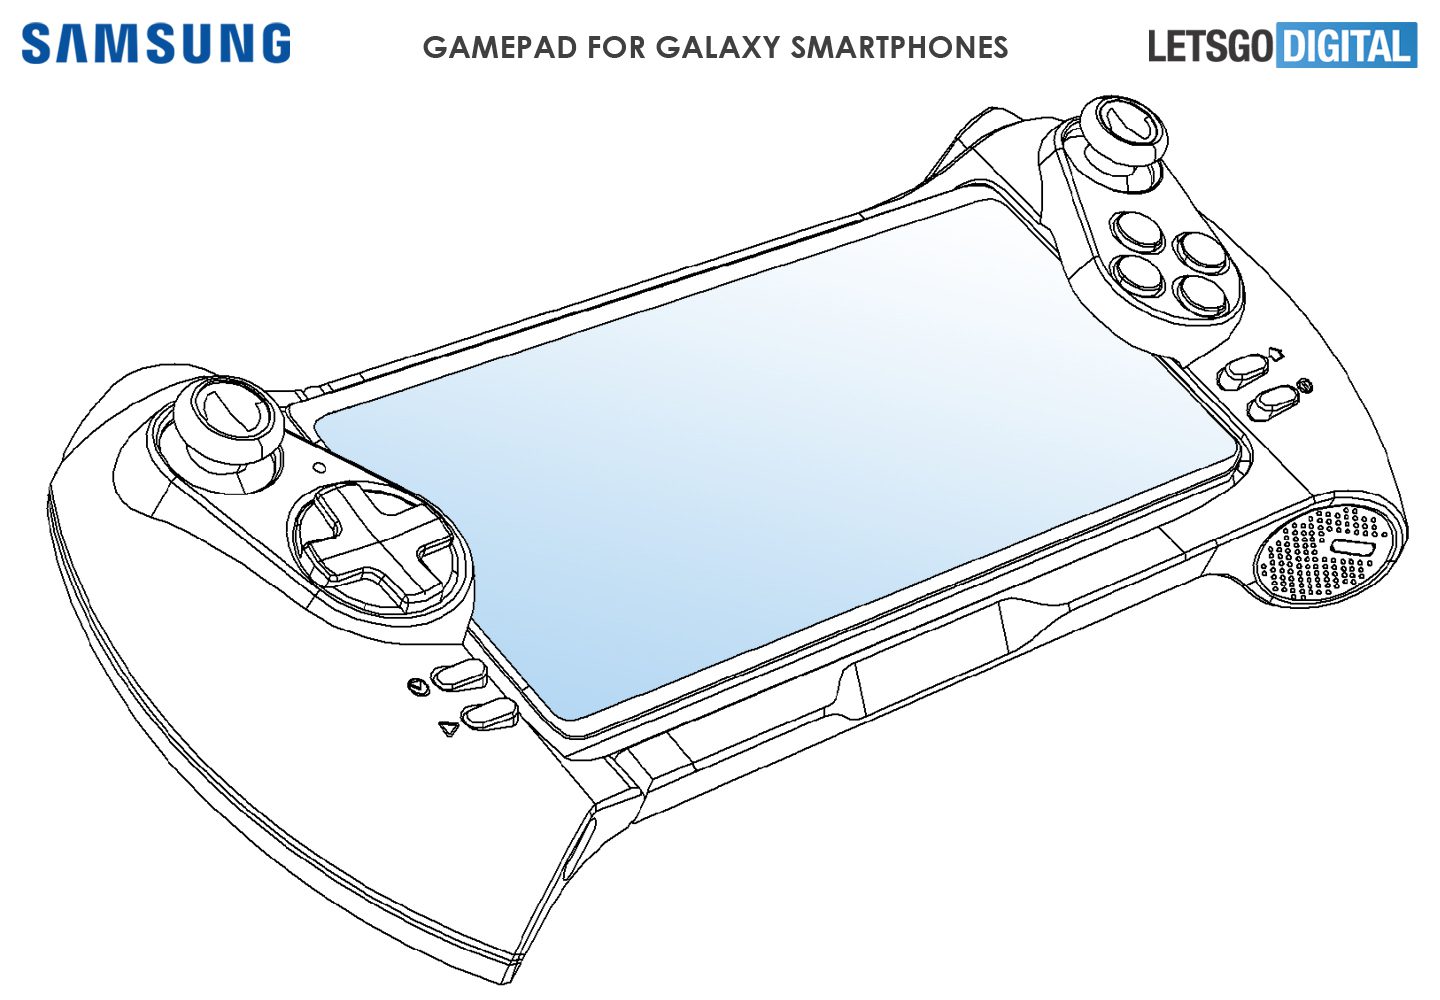 Samsung may be working on a smartphone gamepad accessory for Galaxy phones: Update – already real